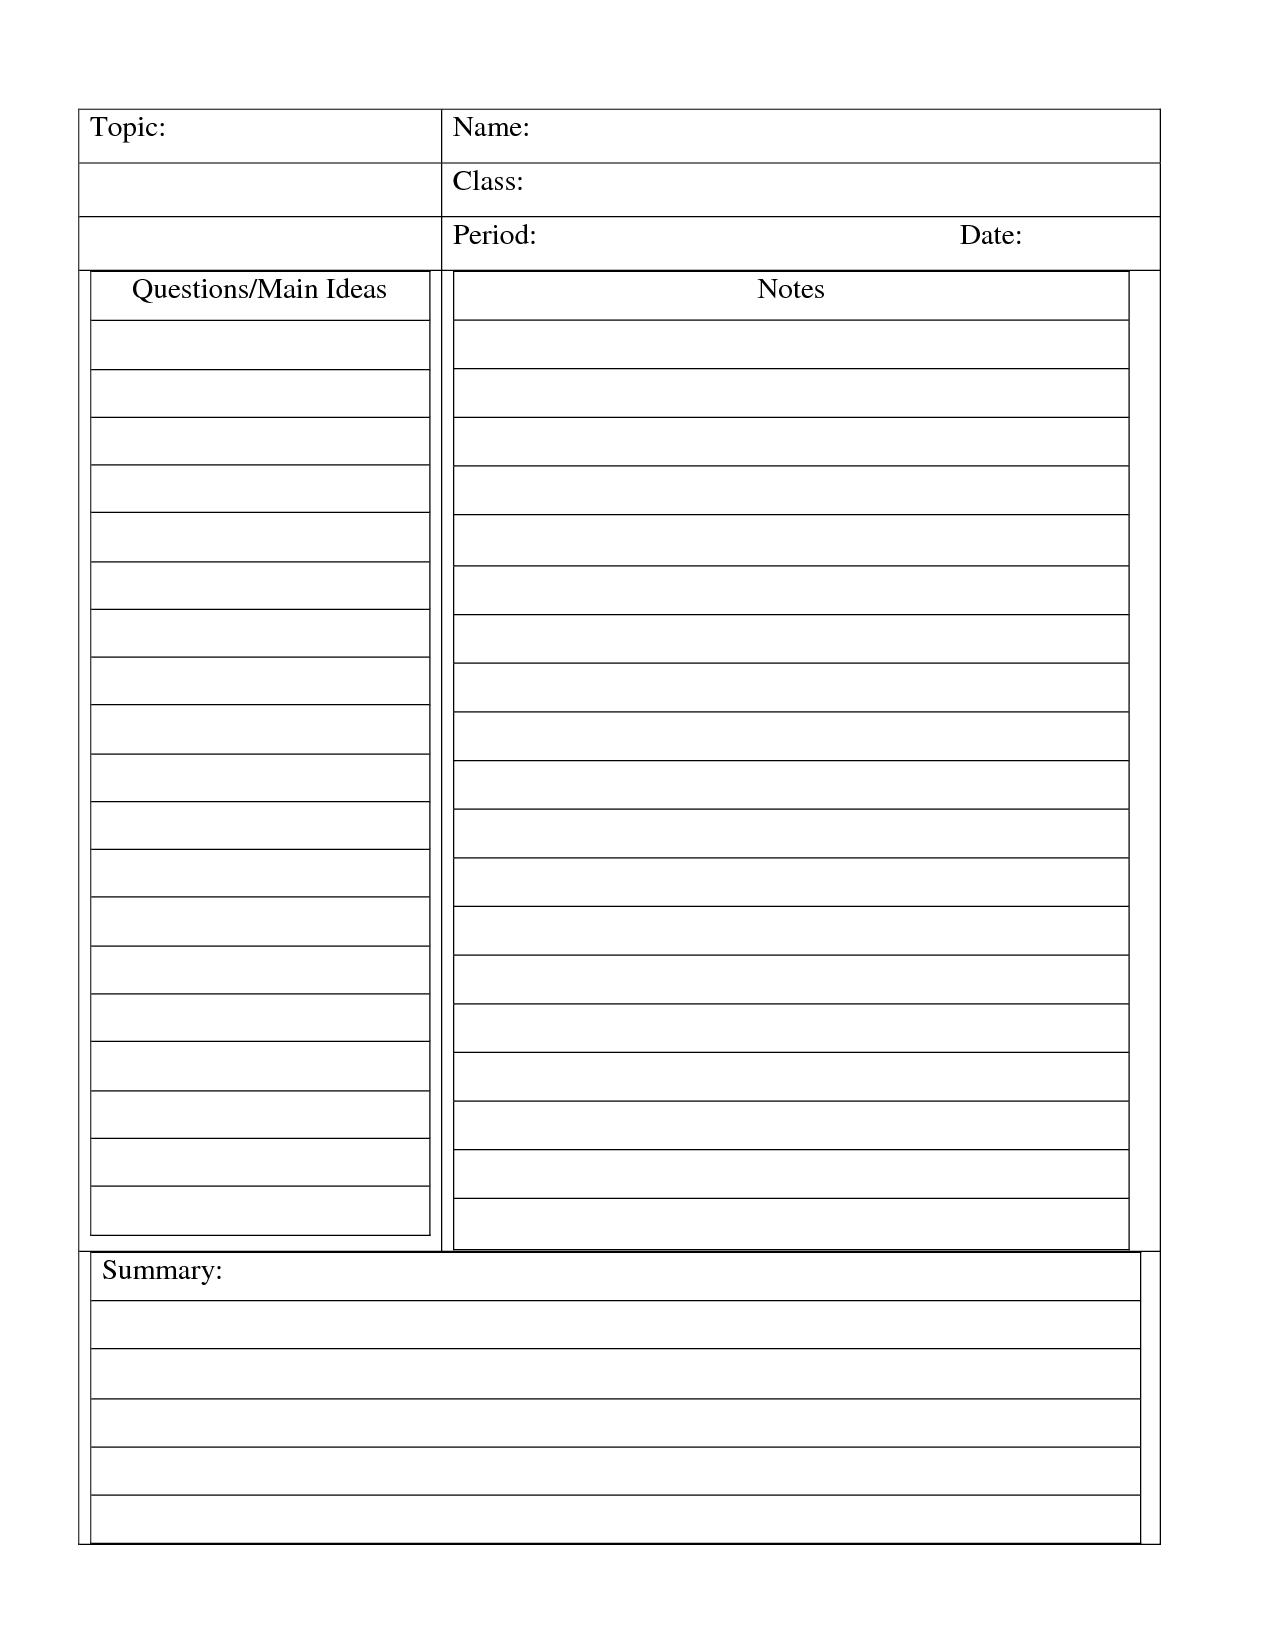 Cornell Method Template Google Search Cornell Notes In High